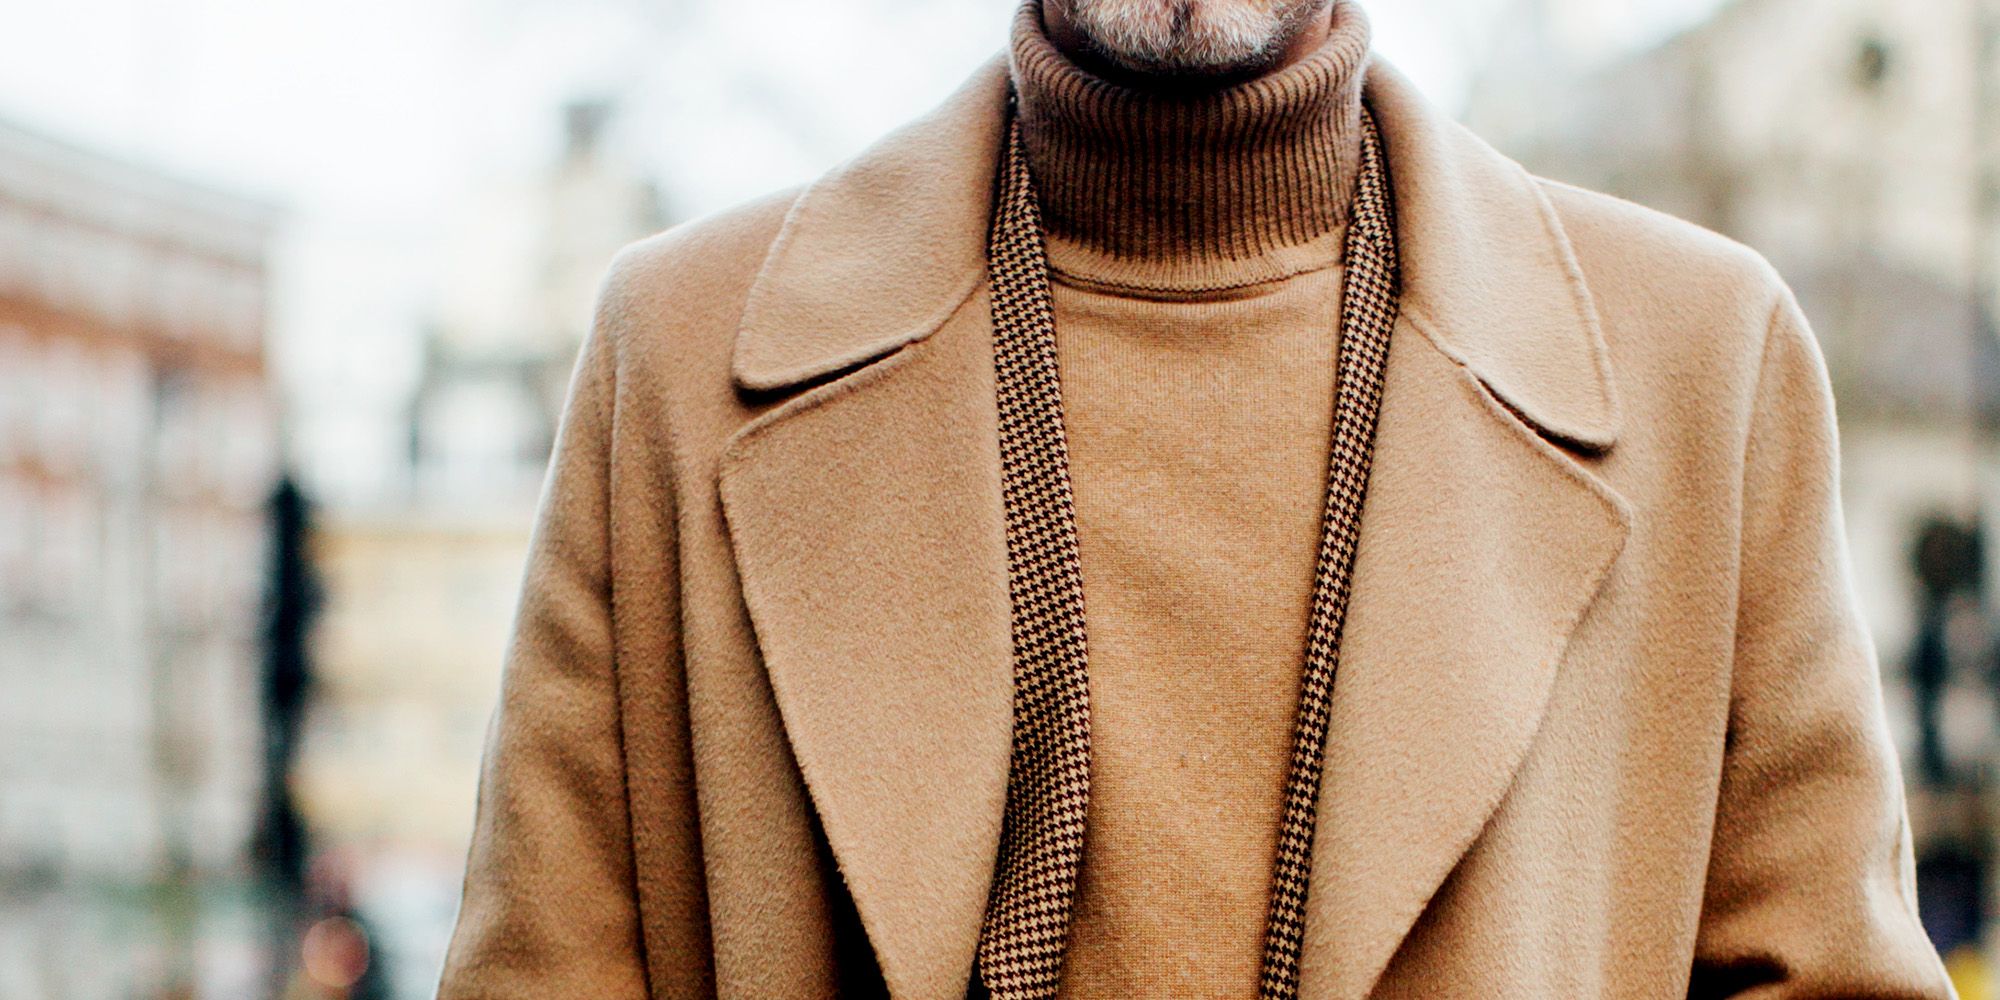 50 Turtleneck Outfits for a Chic Winter Look - How To Wear A Turtleneck  Sweater